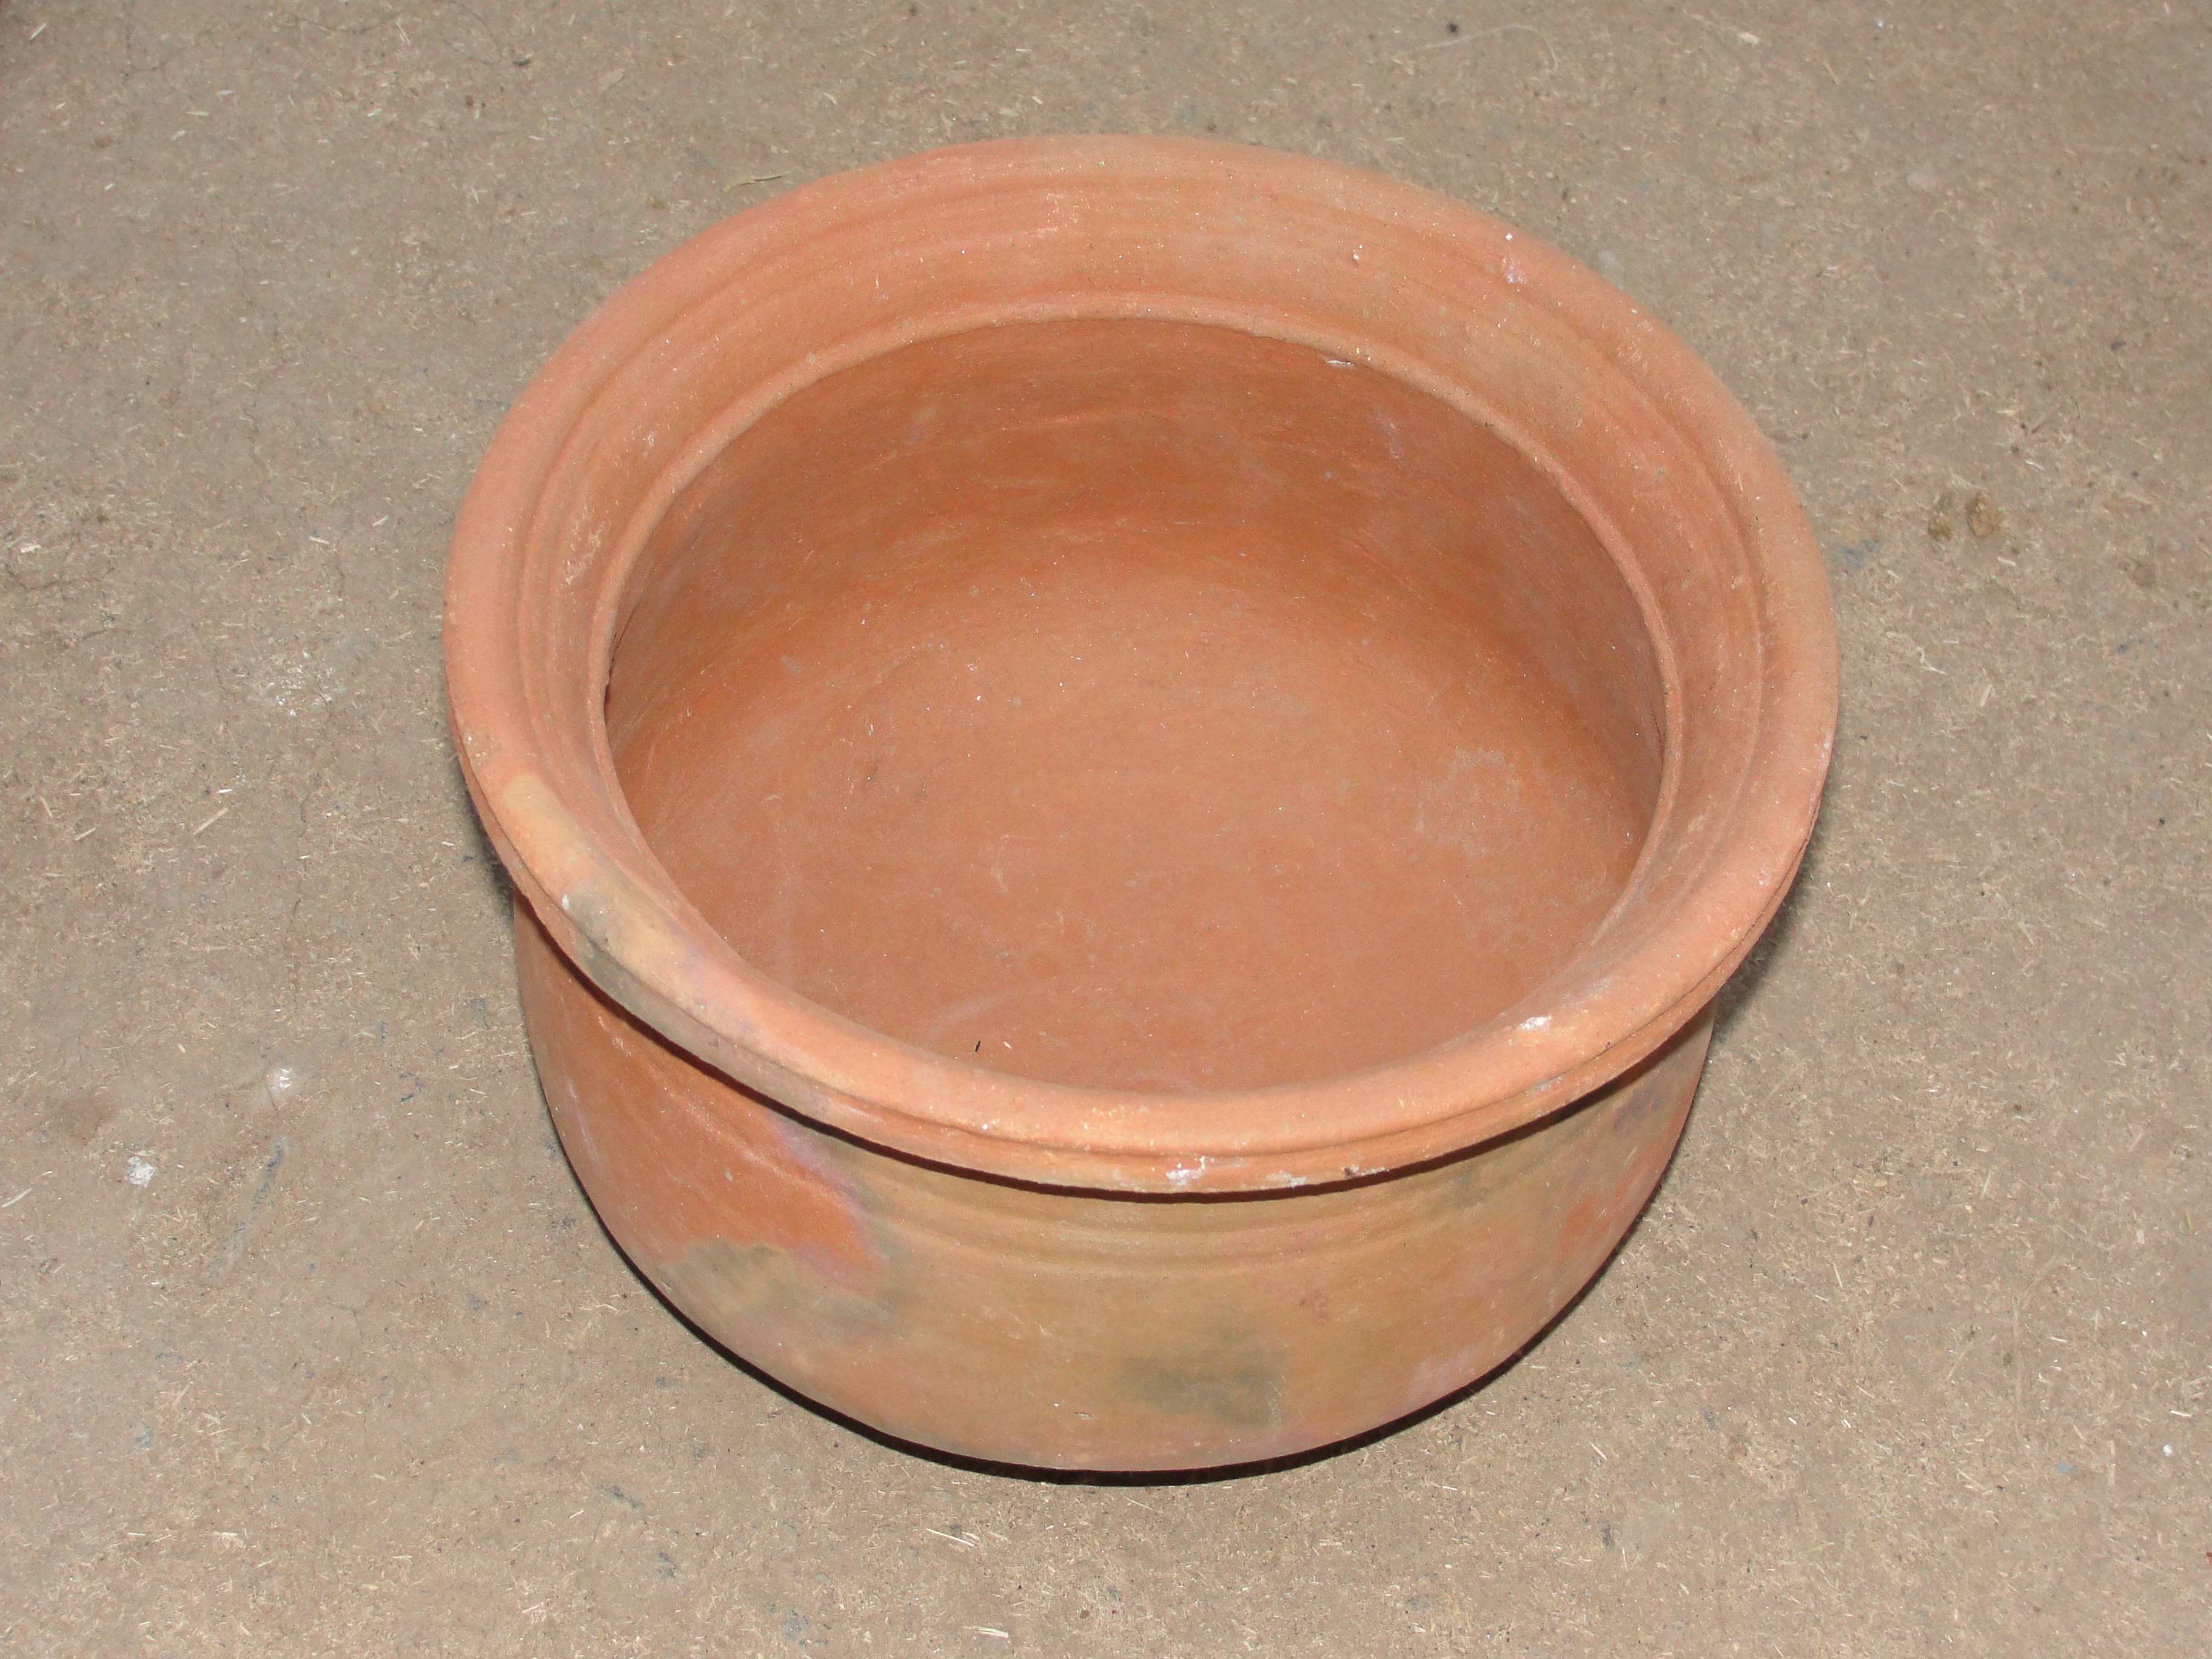 File:A depiction of mud pot 3.JPG - Wikimedia Commons